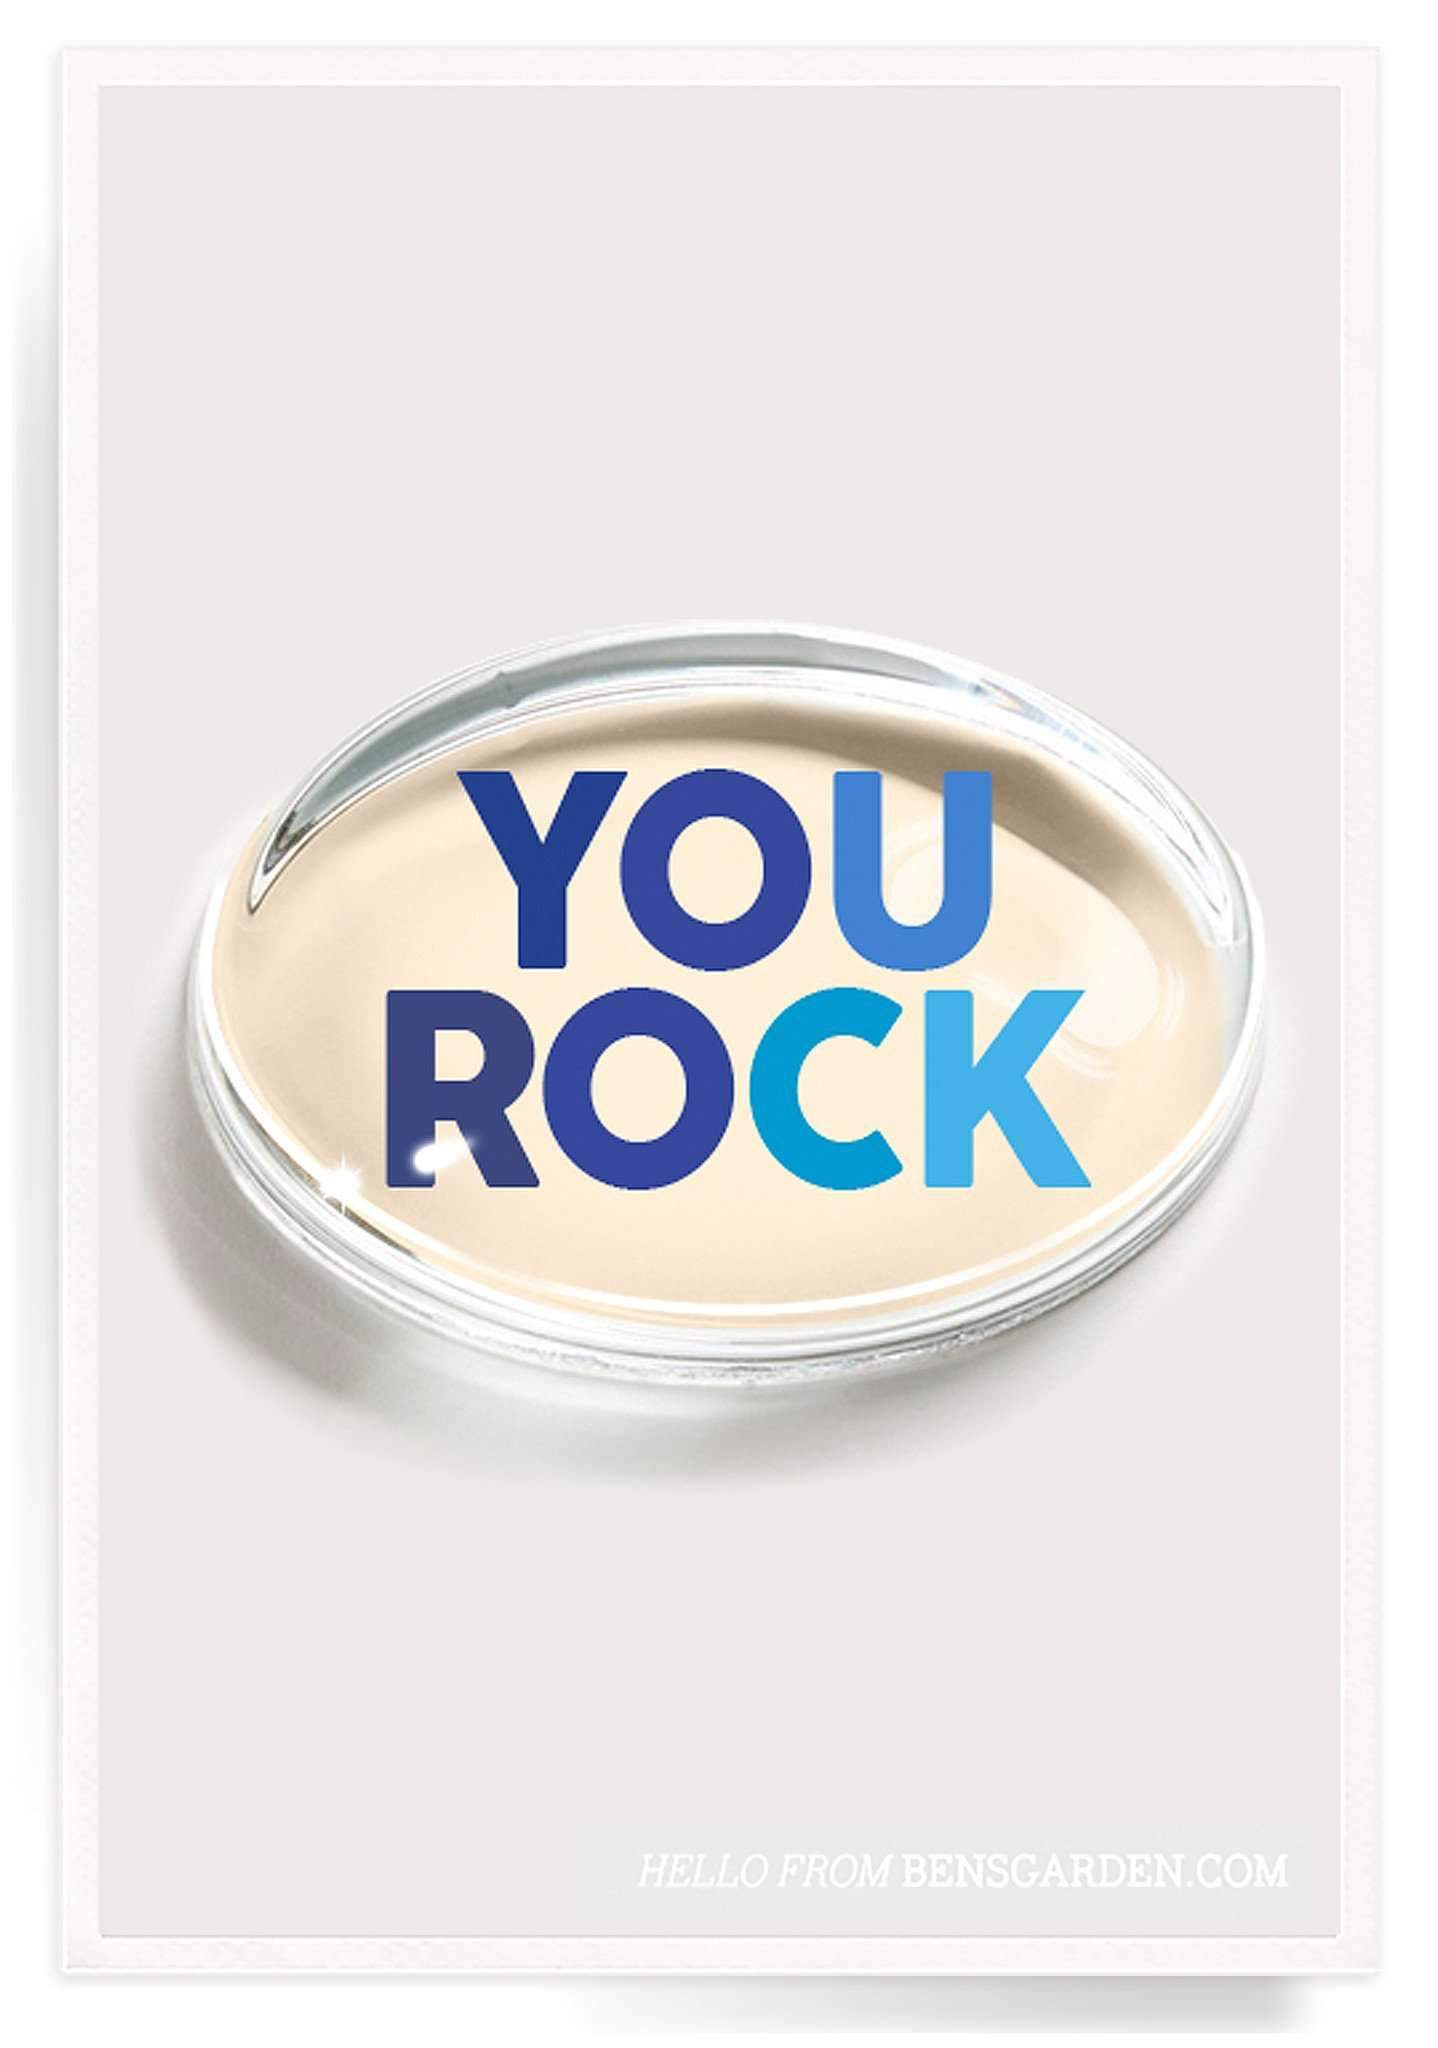 You Rock Blue Crystal Dome Paperweight - Bensgarden.com